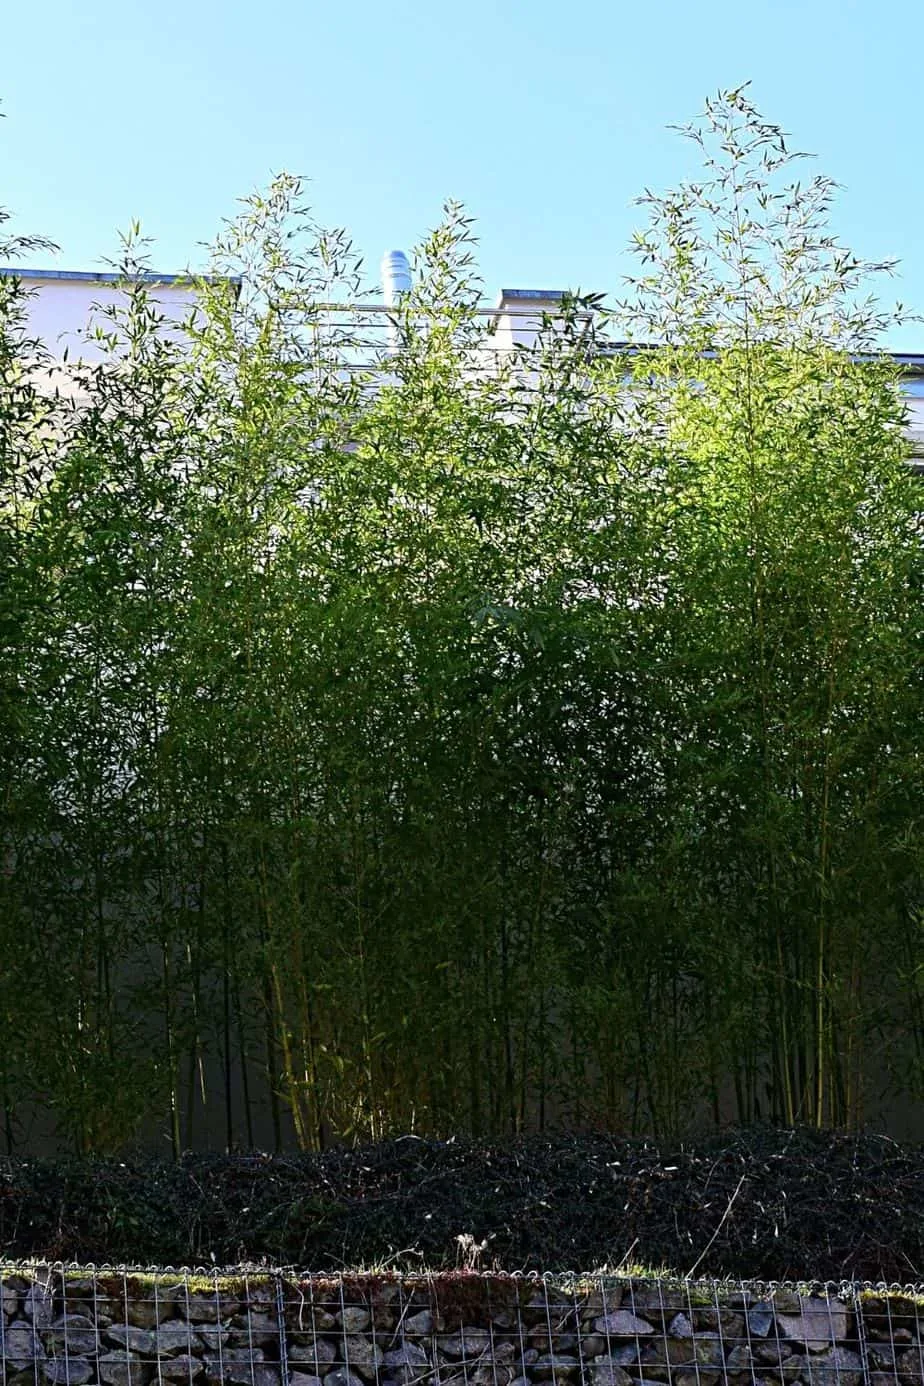 Bamboo grows rapidly and can give you a hedge in no time for privacy